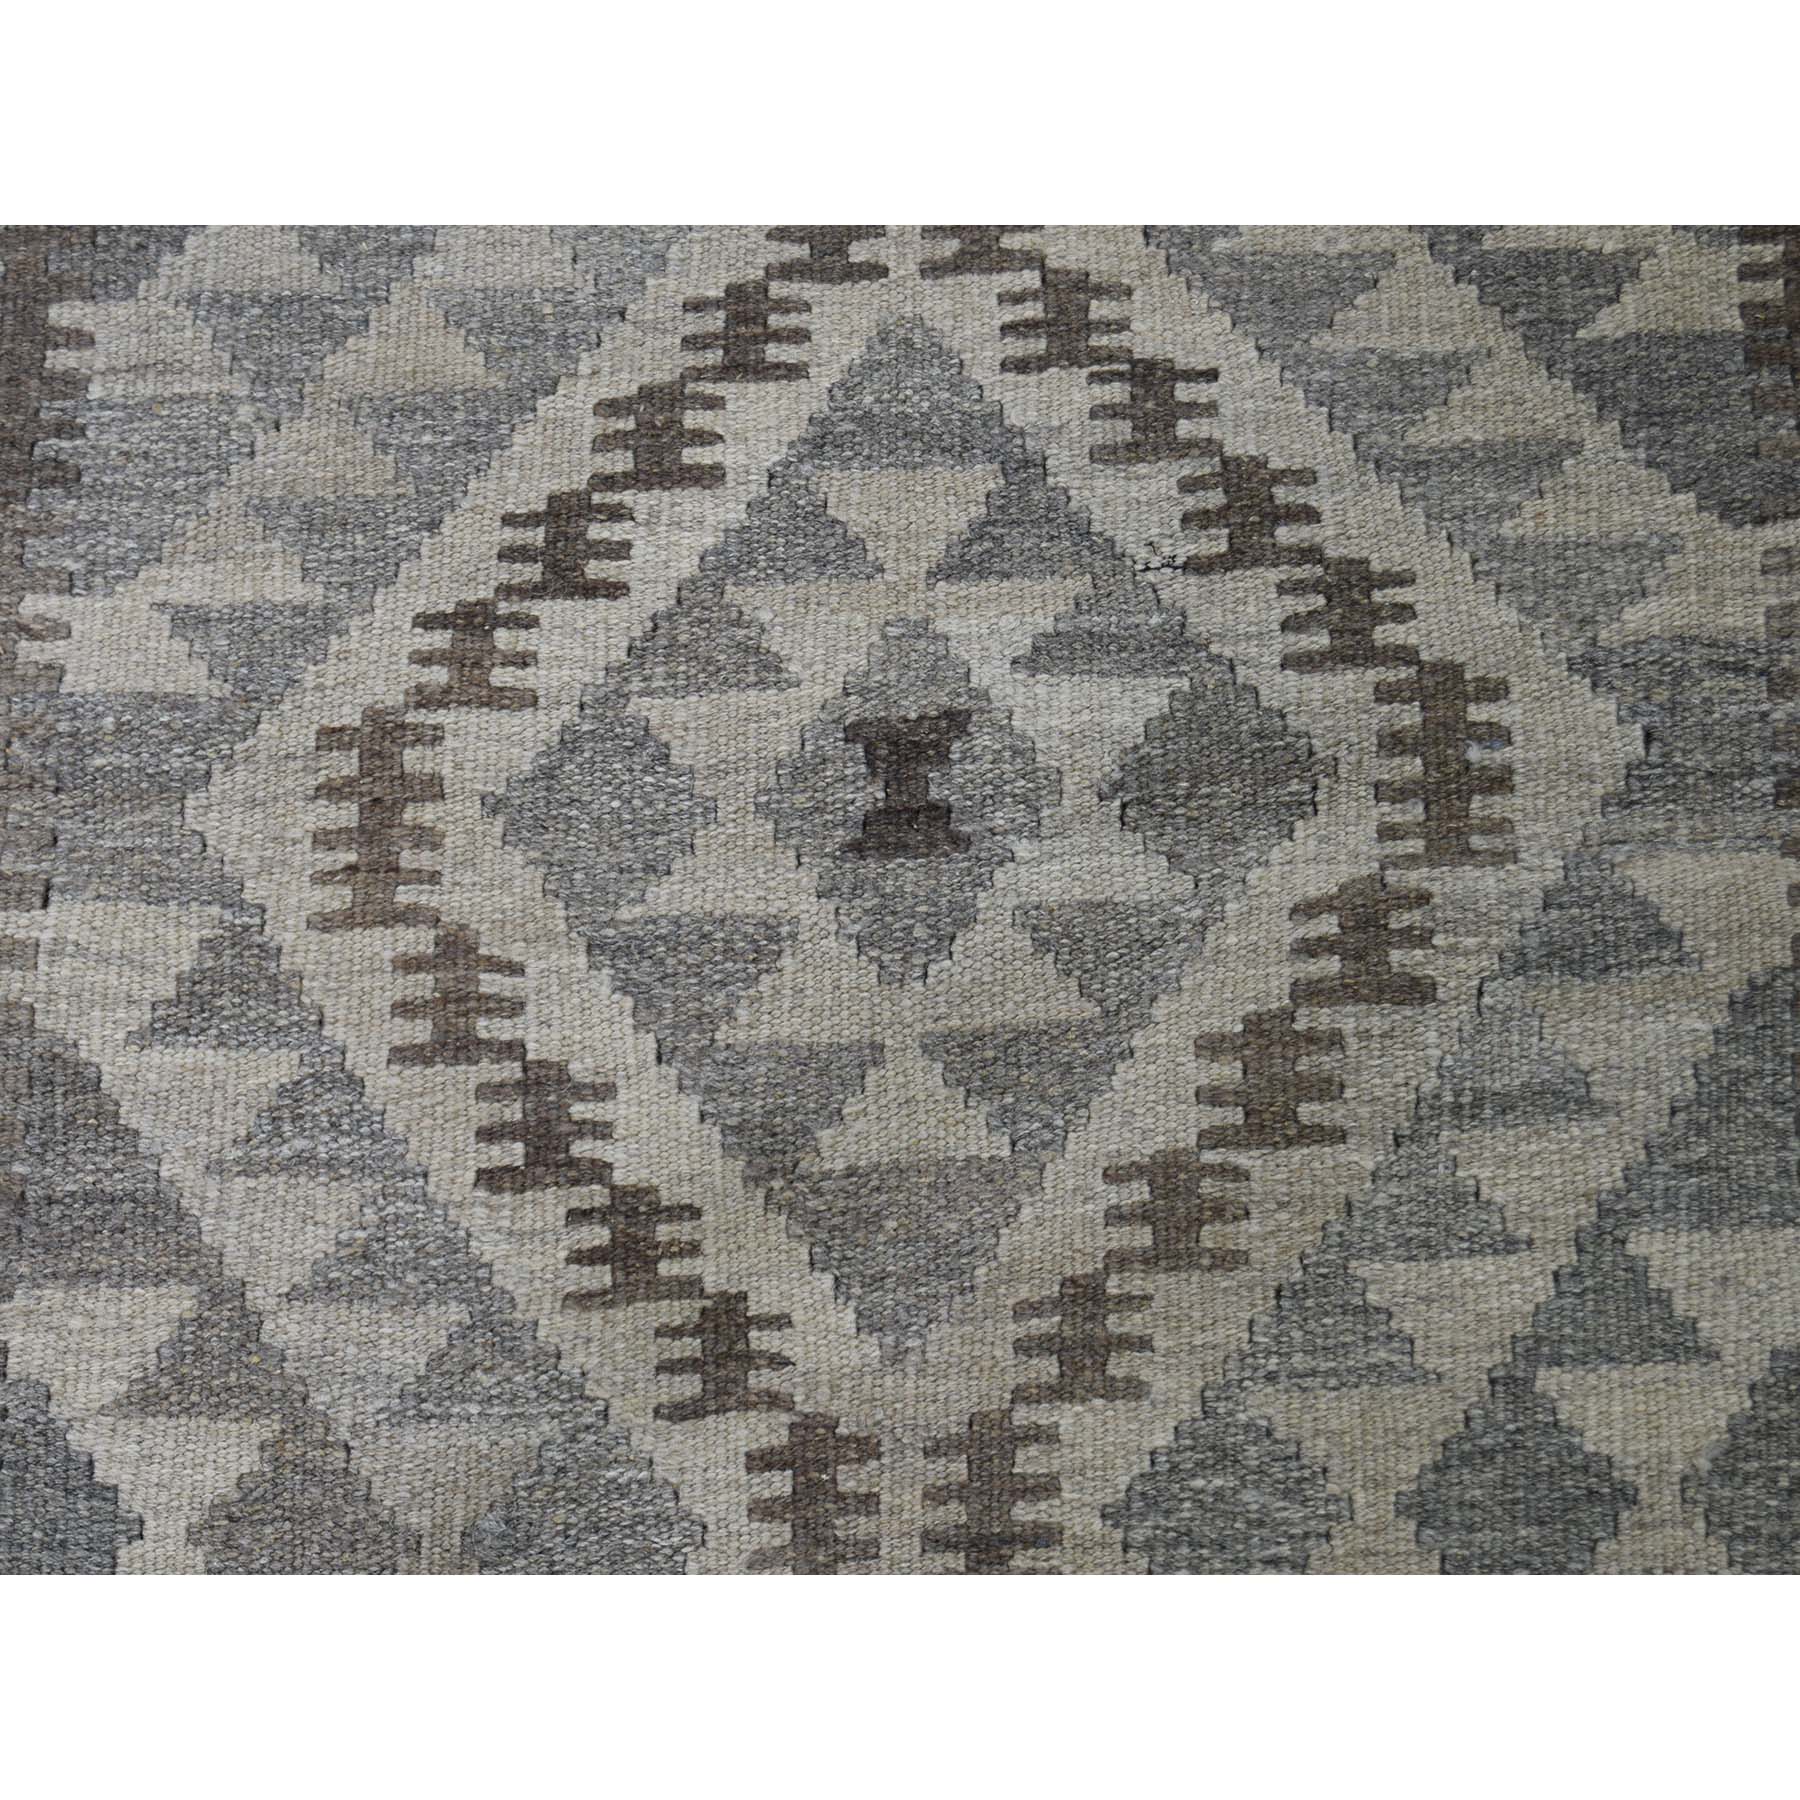 3-2 x5- Afghan Kilim Reversible Undyed Natural Wool Hand Woven Oriental Rug 